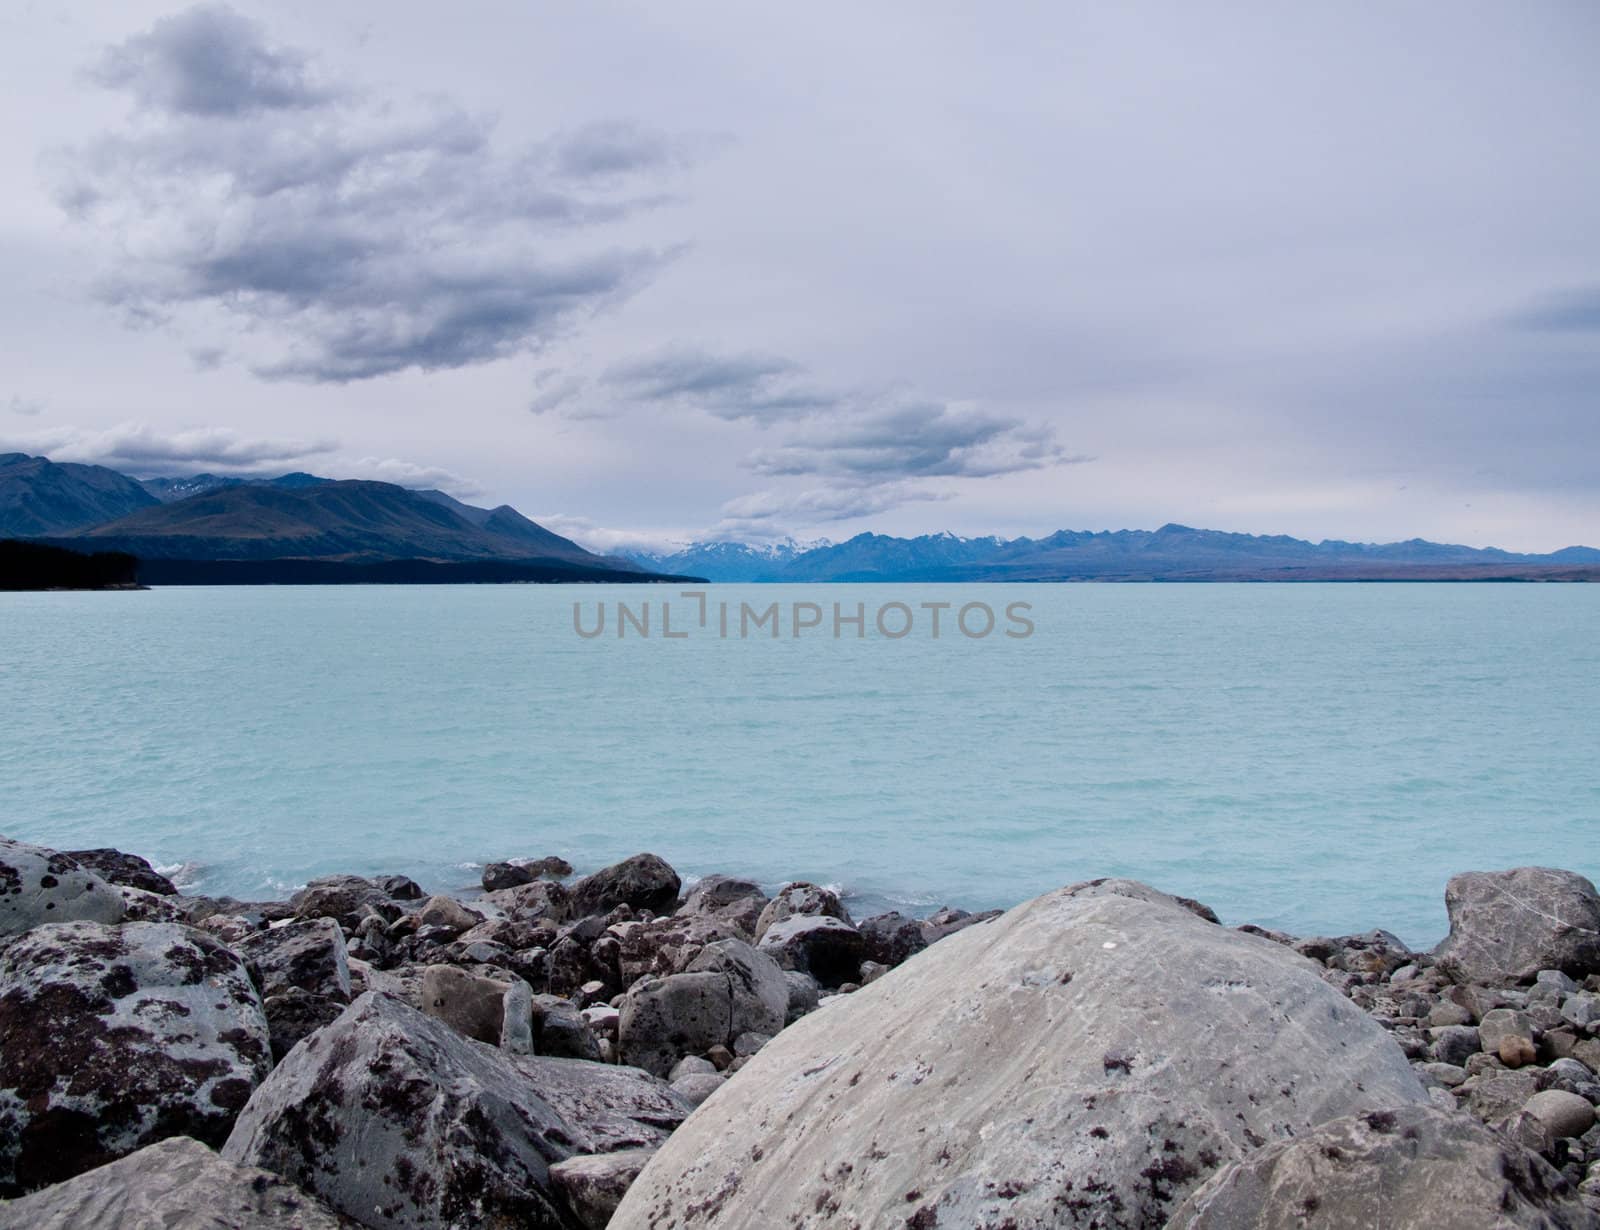 Mount Cook in New Zealand surrounded by clouds with a blue lake